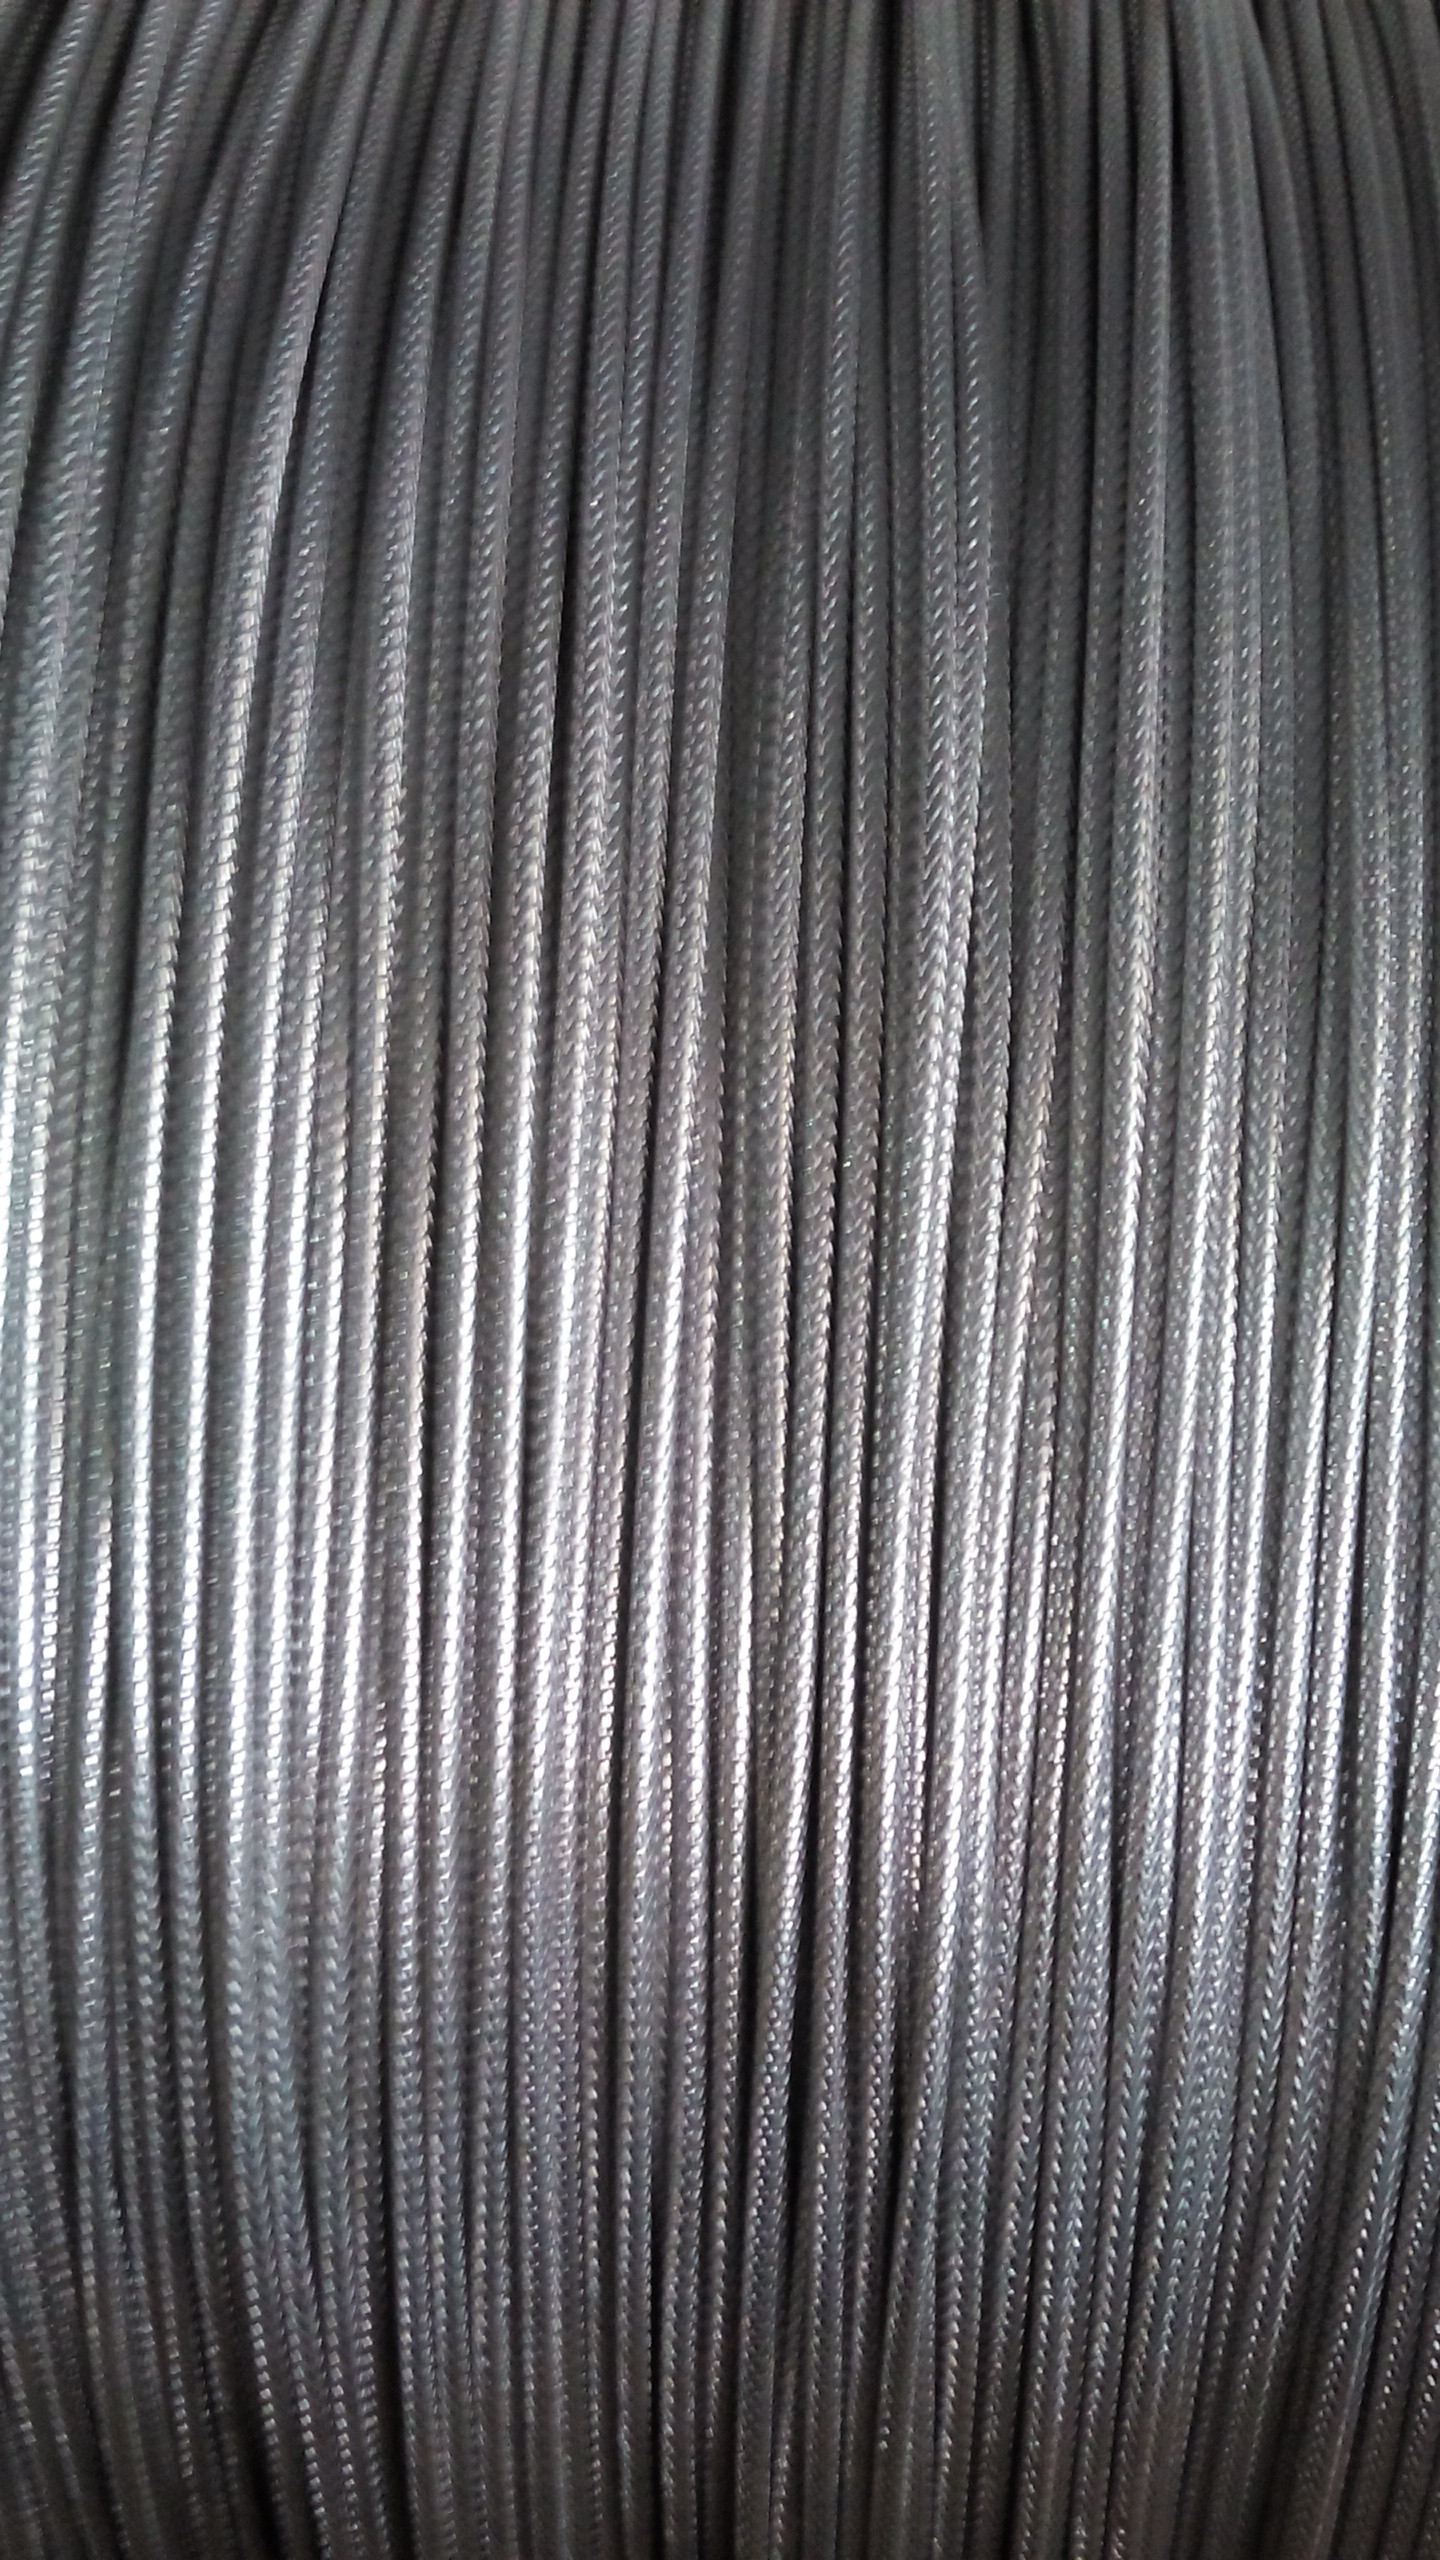  Semi Finished Braiding RG Cable CCS Inner Condutor 75 Ohm 4900 Meters Per Drum Manufactures